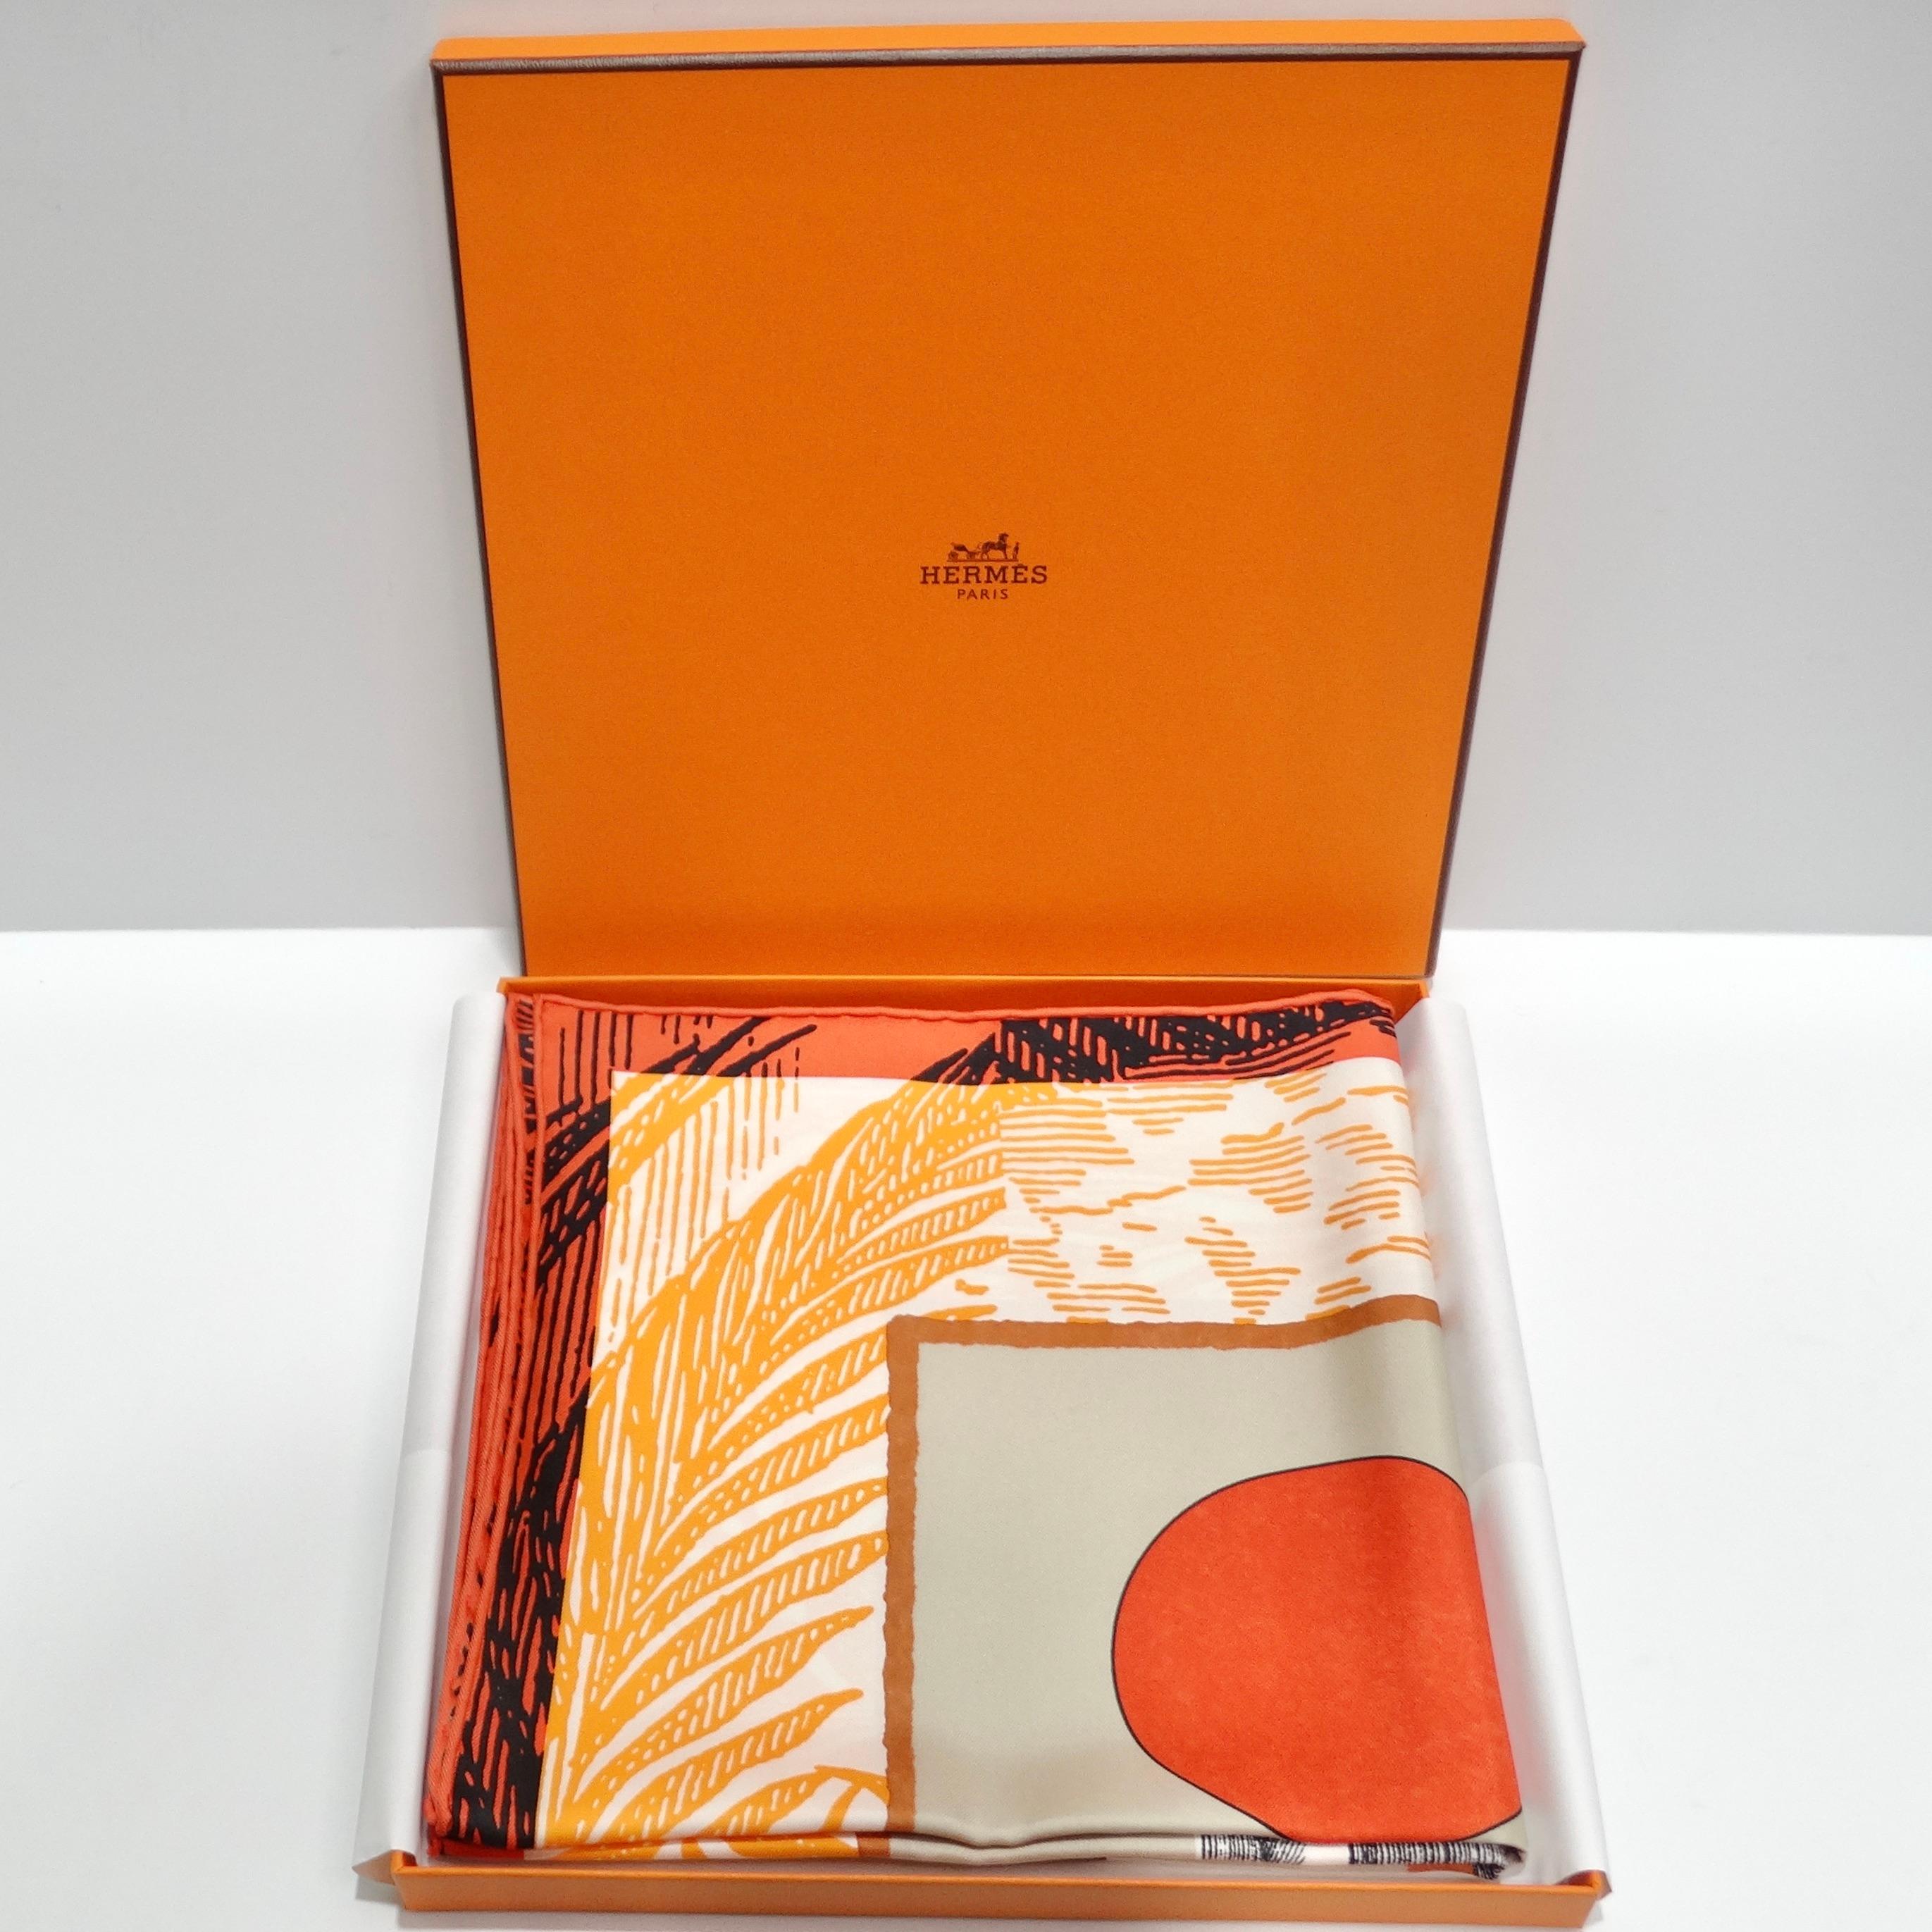 Introducing the Hermes Cavalier En Formes Silk Scarf, a stunning piece that encapsulates the elegance and creativity of Hermes' iconic scarf designs. This luxurious scarf is made from 100% silk, providing a smooth and sumptuous texture that feels